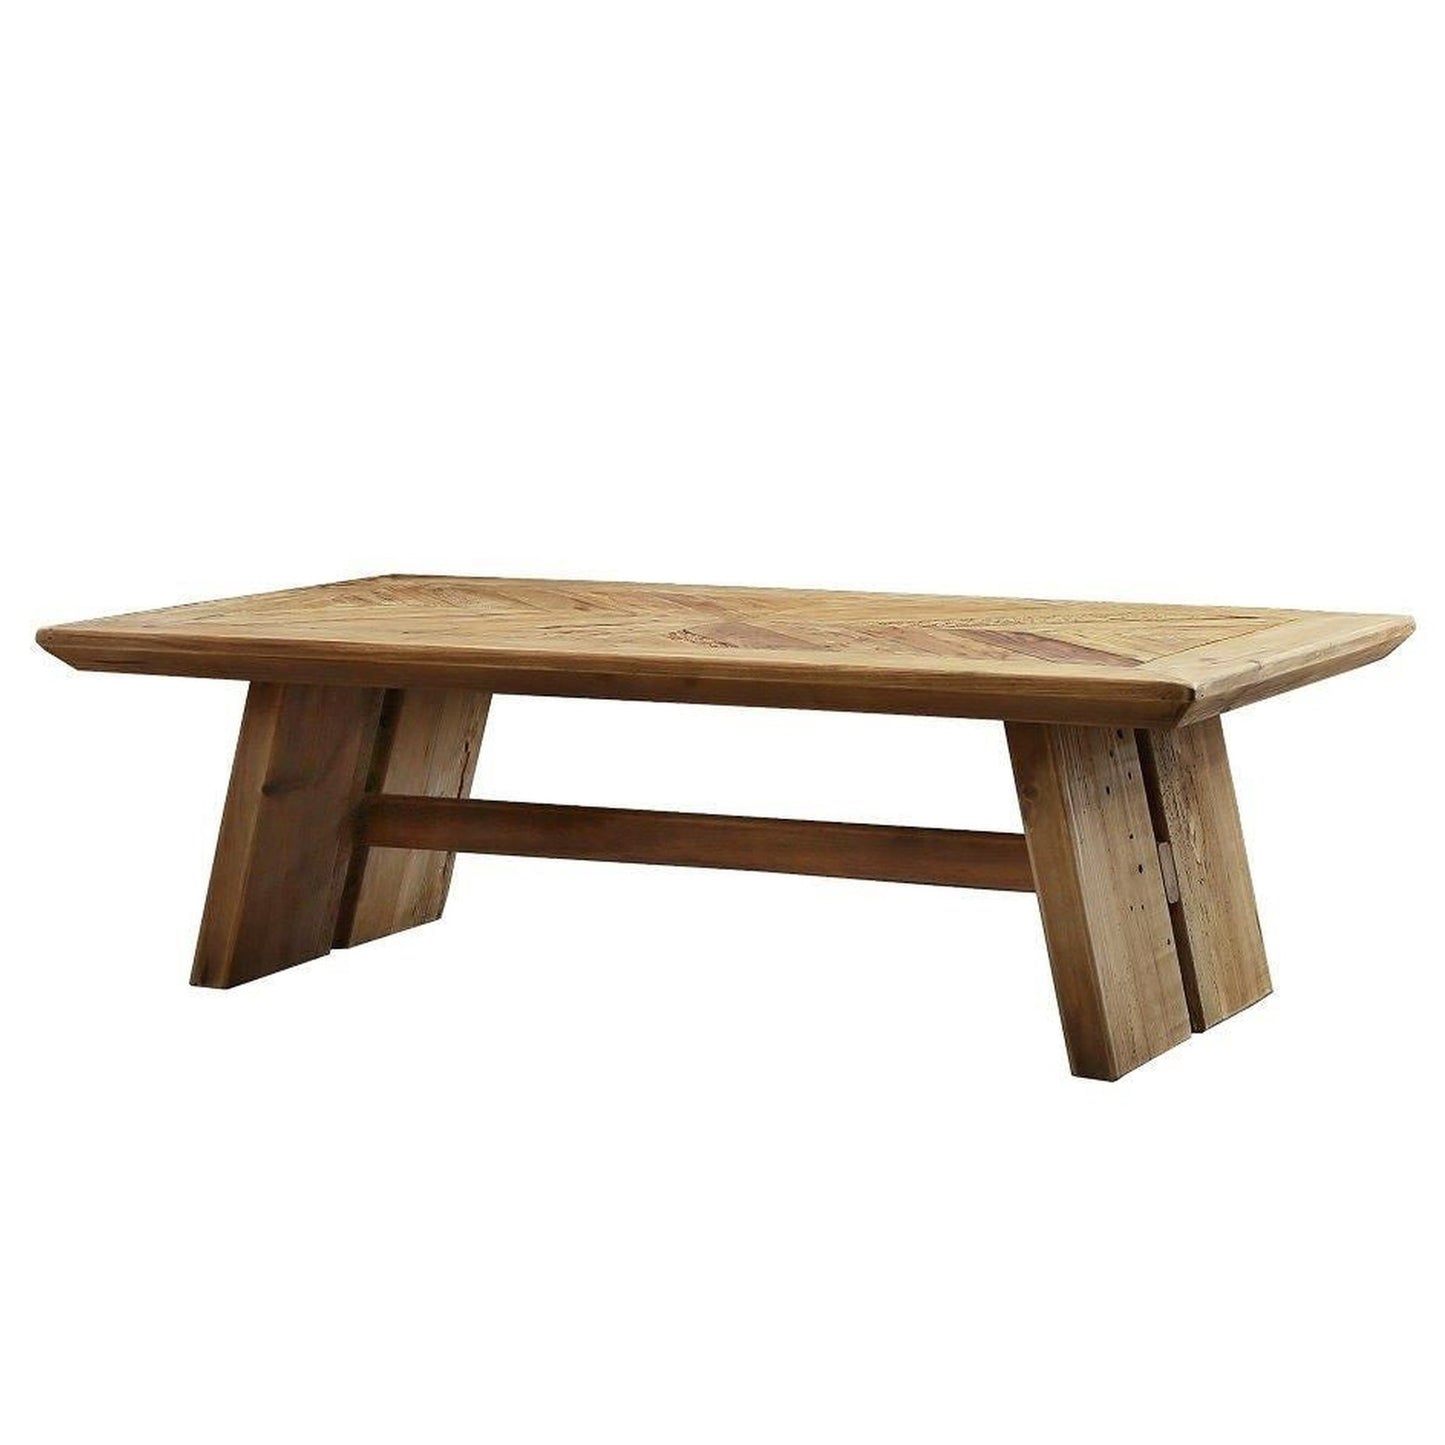 Reclaimed Wooden Rectangular Coffee Table, 10% Off